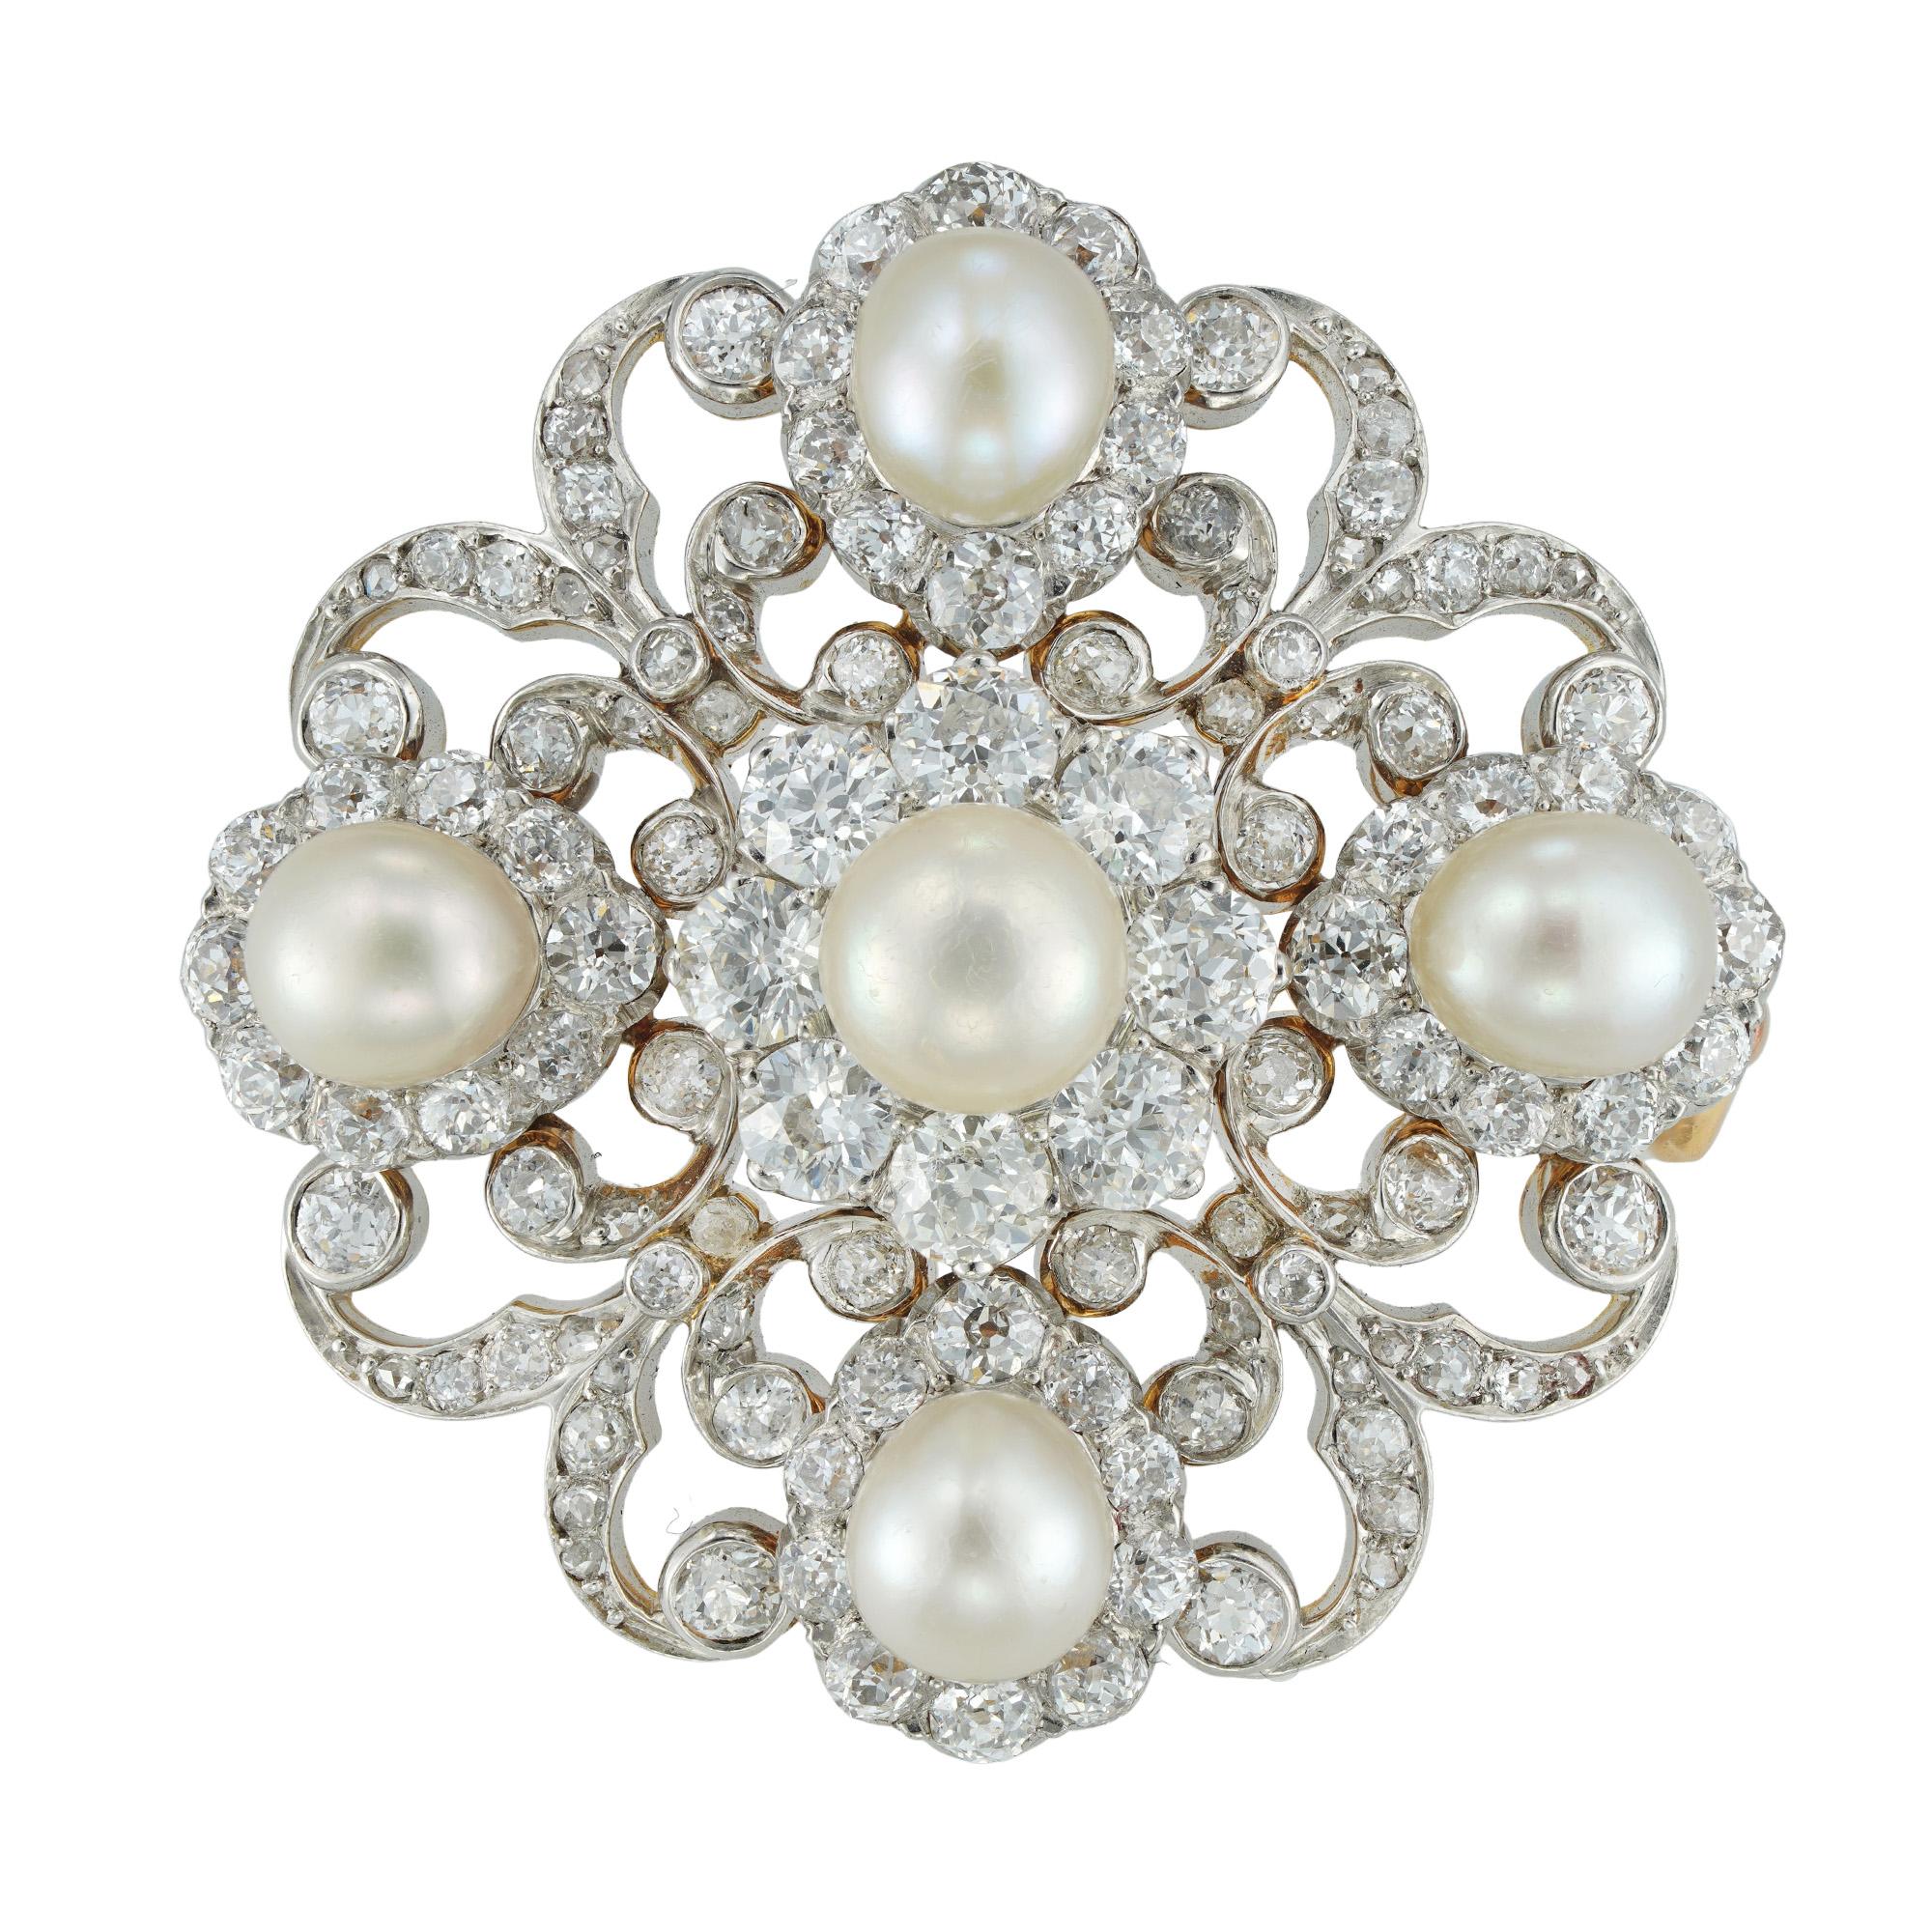 A Victorian diamond and pearl scroll brooch, the central pearl surrounded by a cluster formed of eight old brilliant-cut diamonds, set between four pear-shape pearl and diamond clusters with diamond-set scroll designs in-between, accompanied by GCS